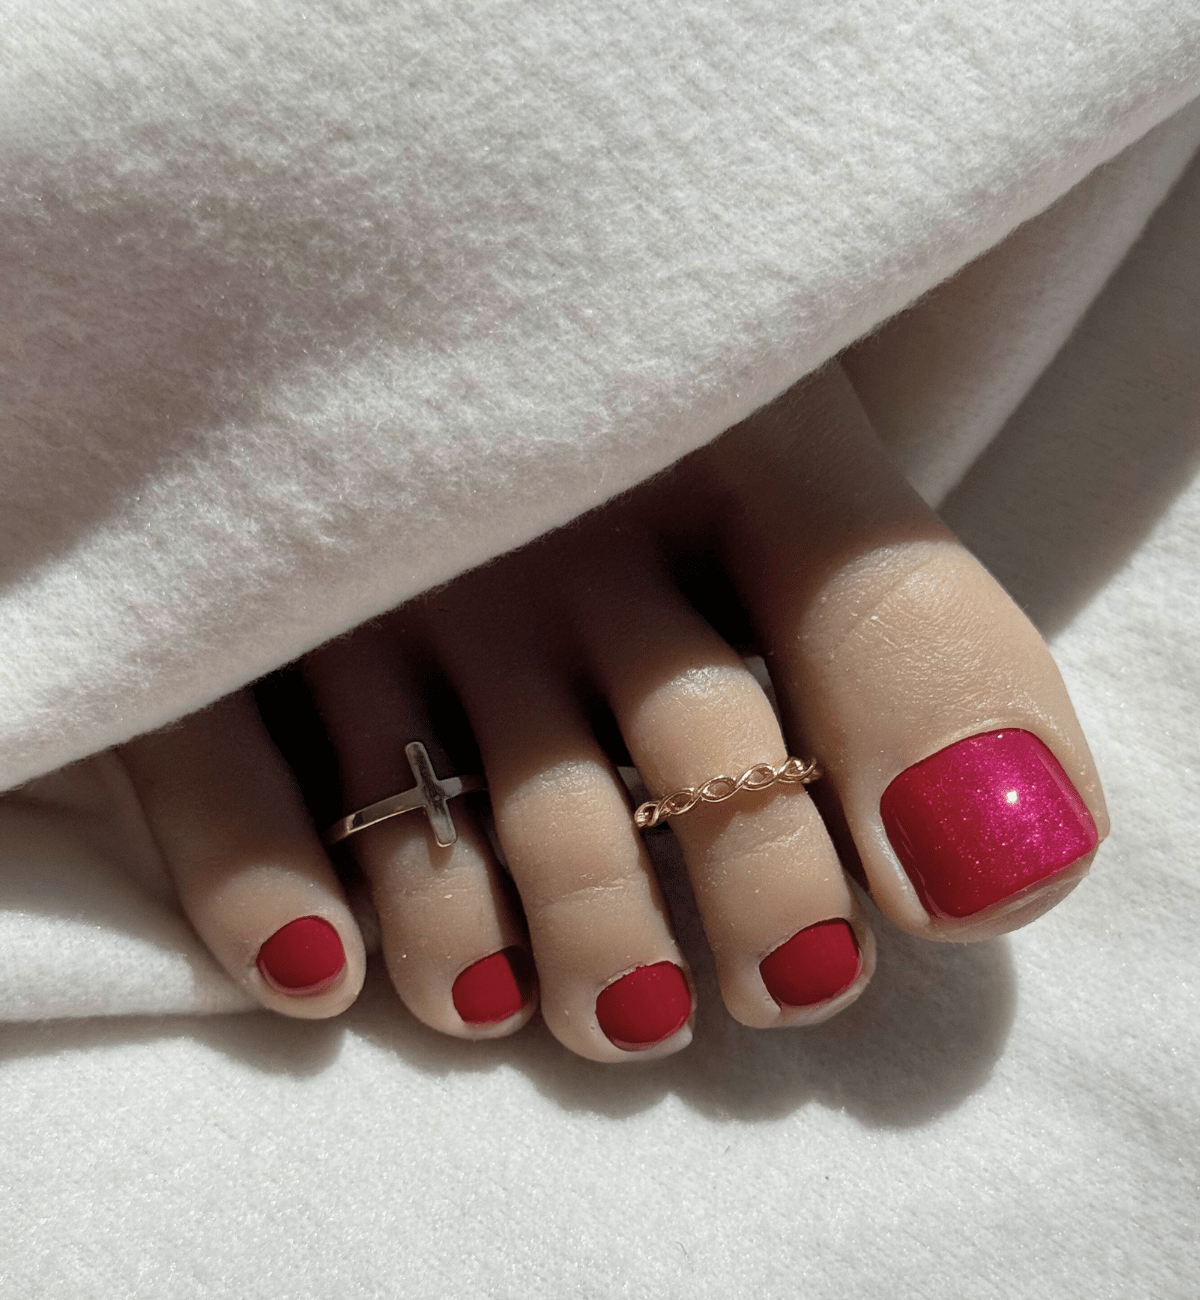 FAUX ONGLES PIEDS ROUGE CERISE